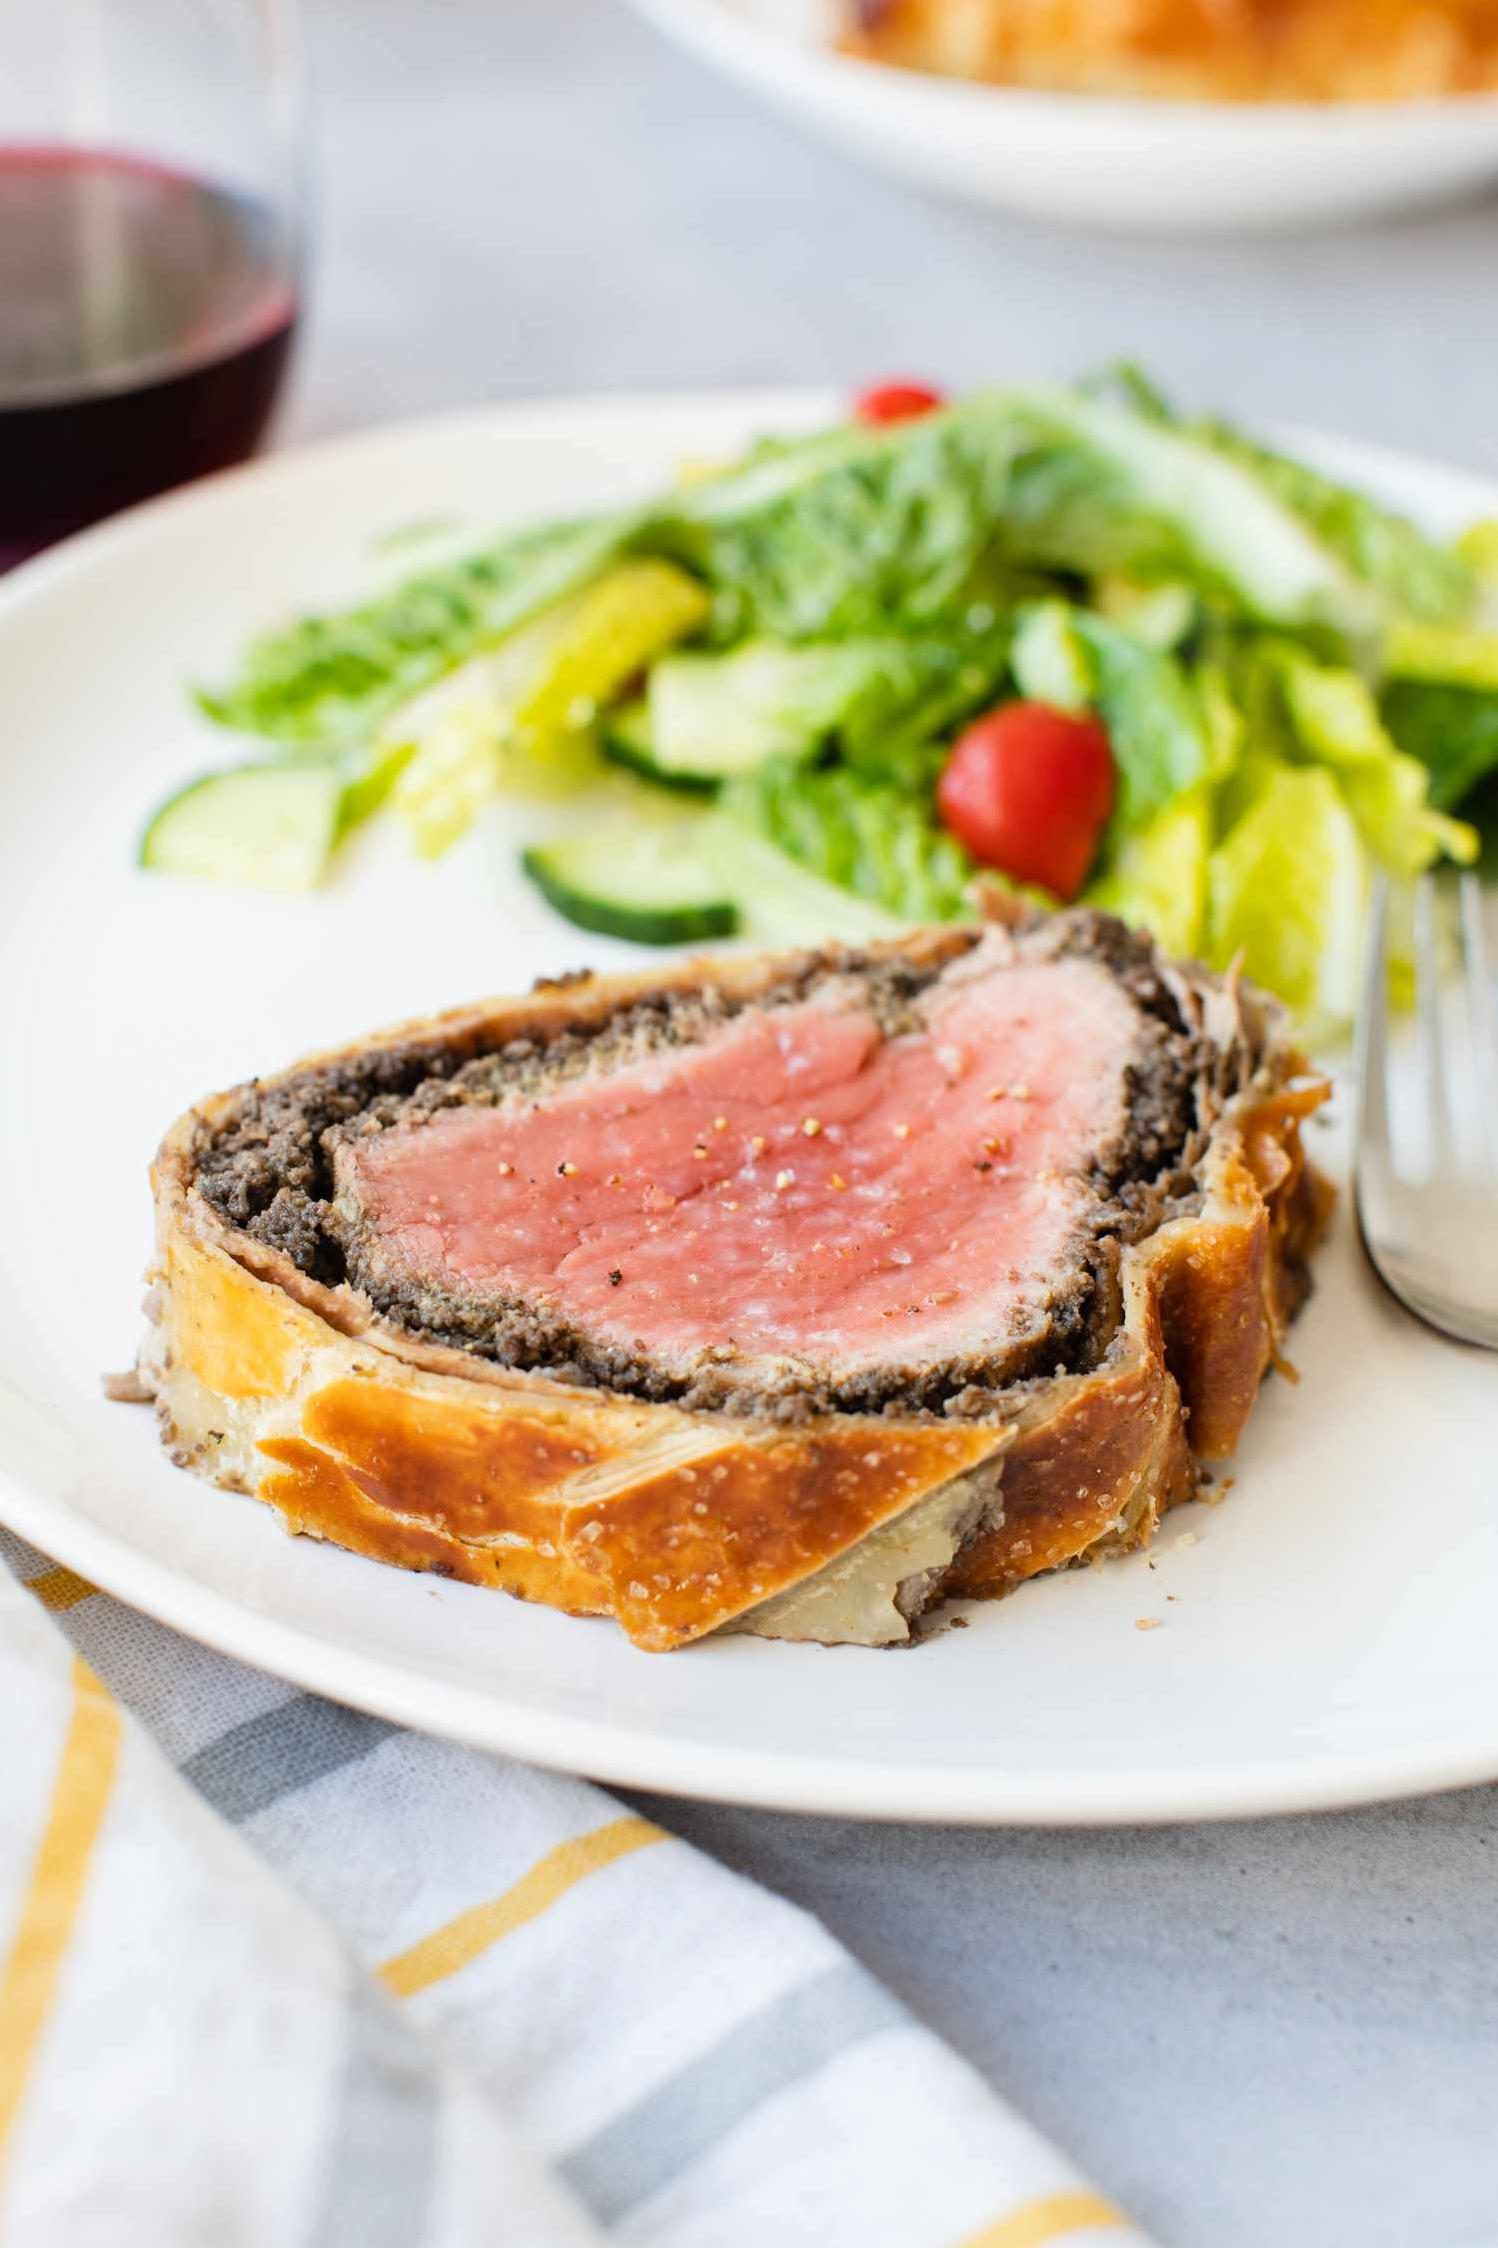  Perfectly seared beef wrapped in savory pastry